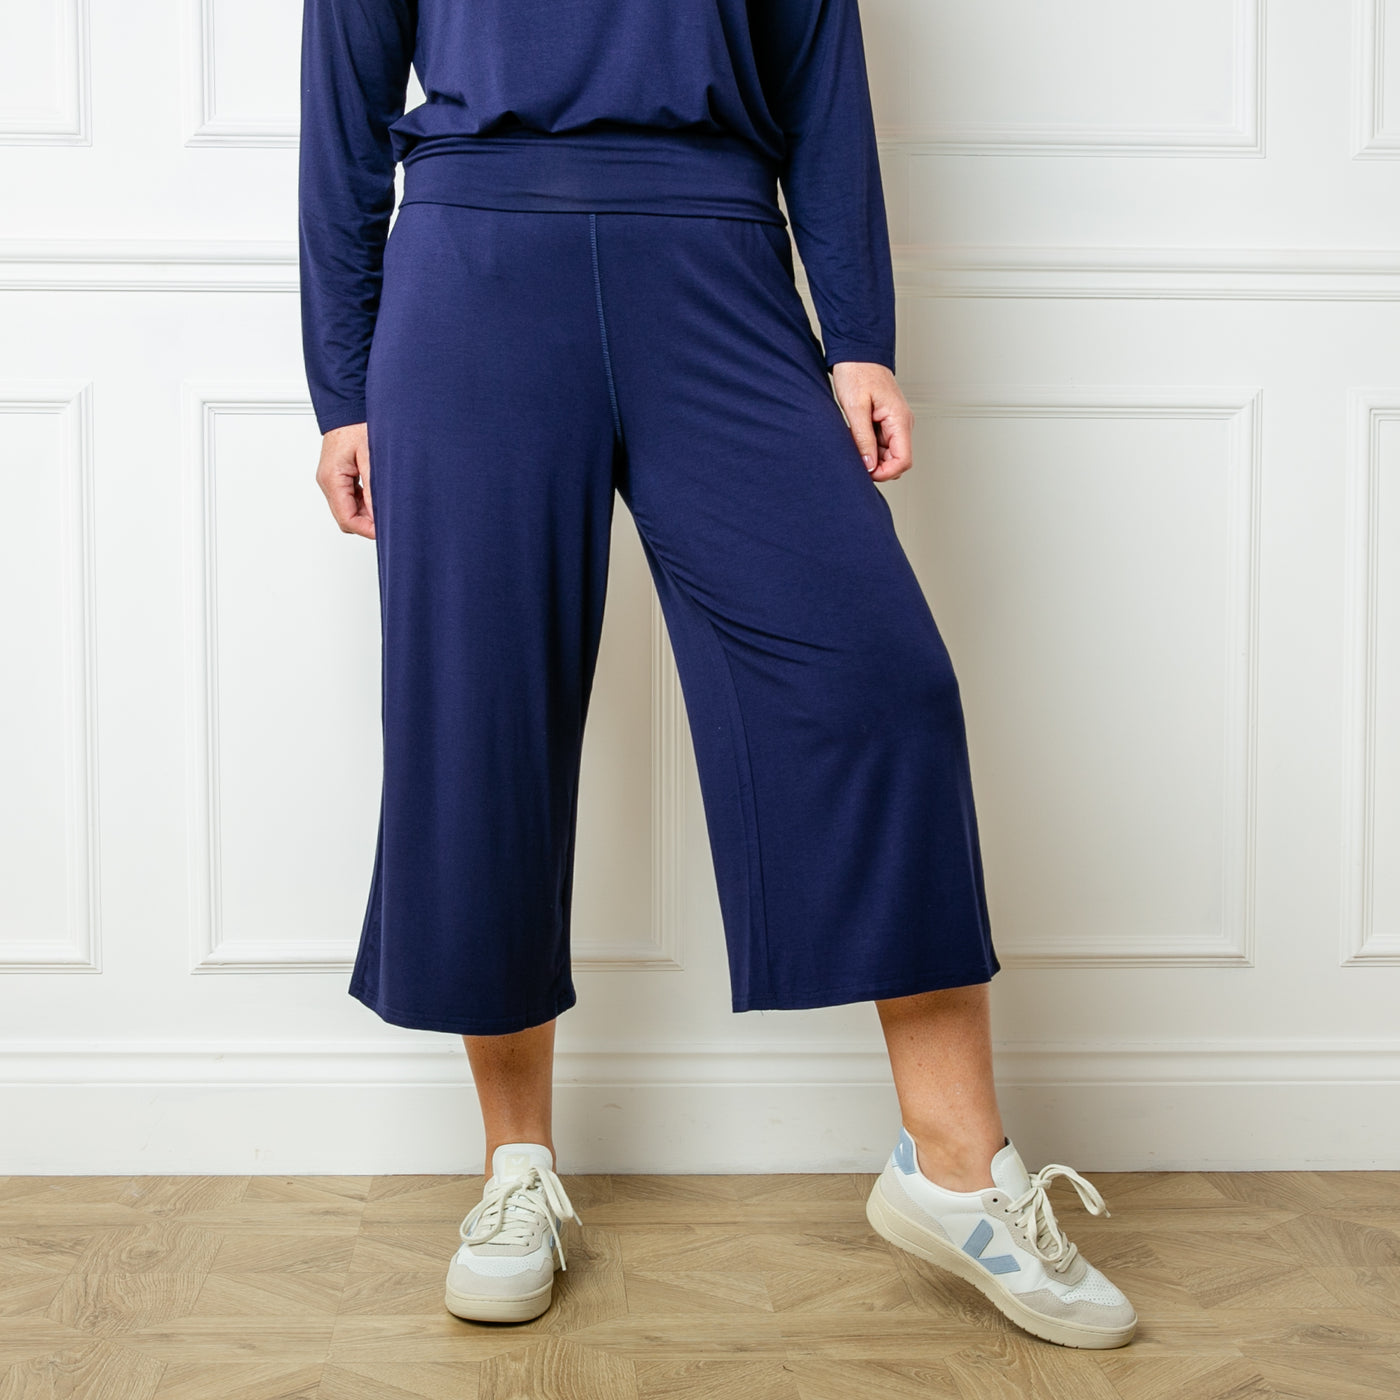 The navy blue Bamboo Fold Over Pants with a wide leg silhouette in a soft and stretchy material